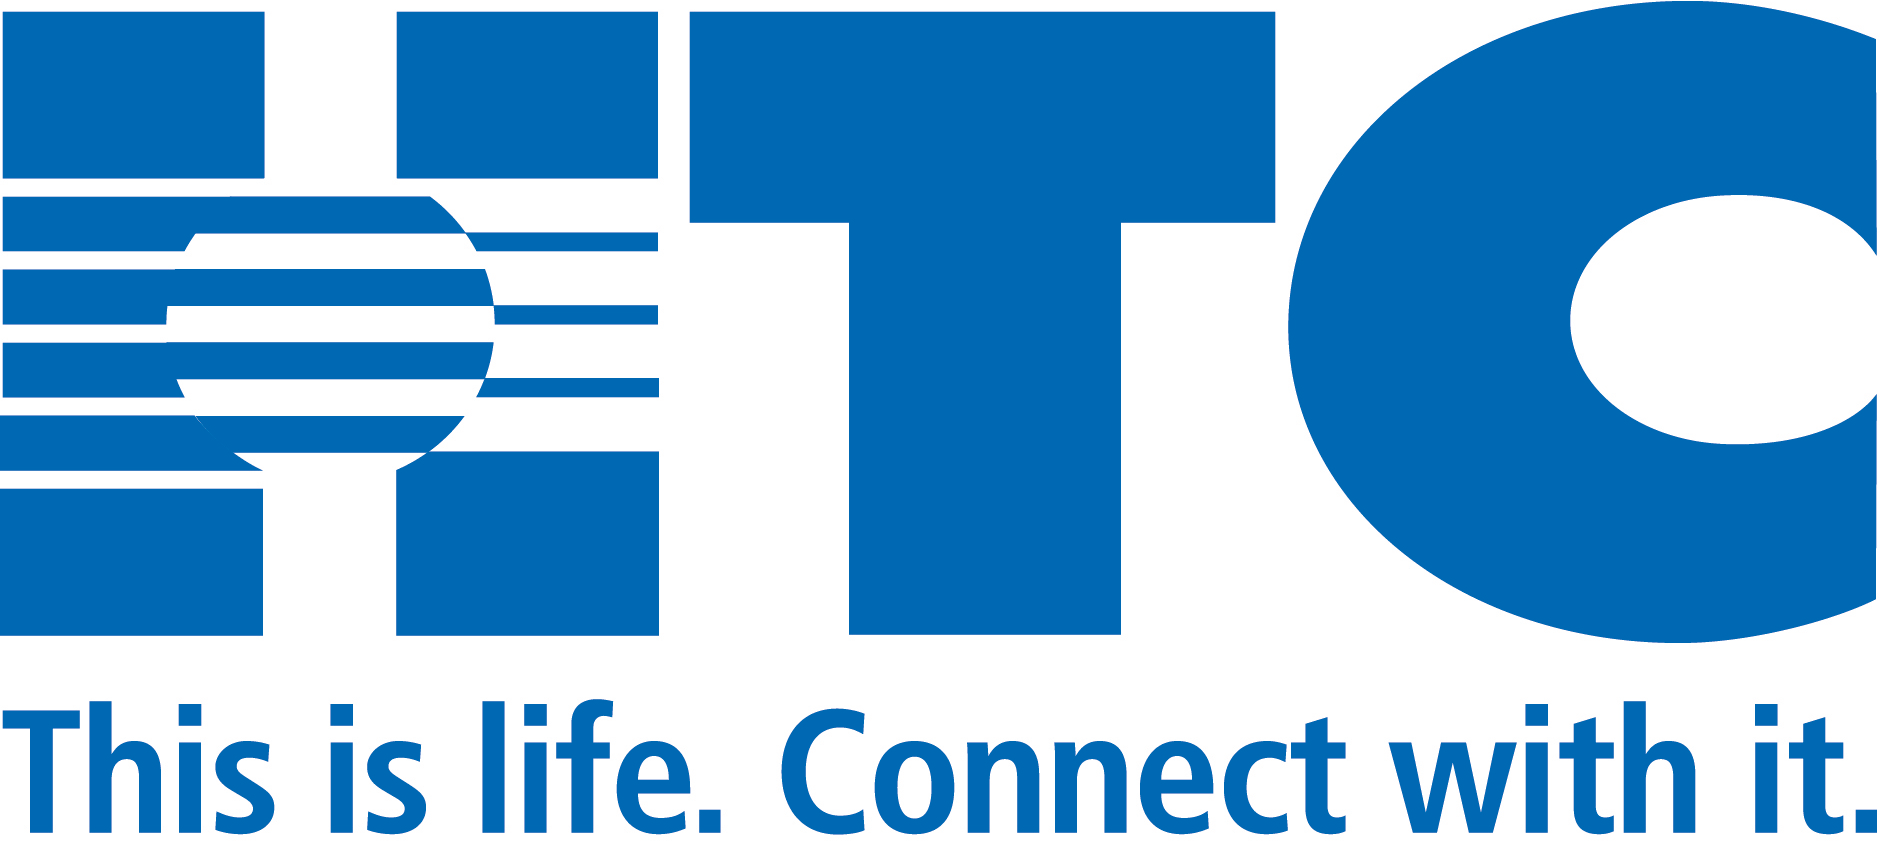 HTC This is Life Connect With It logo